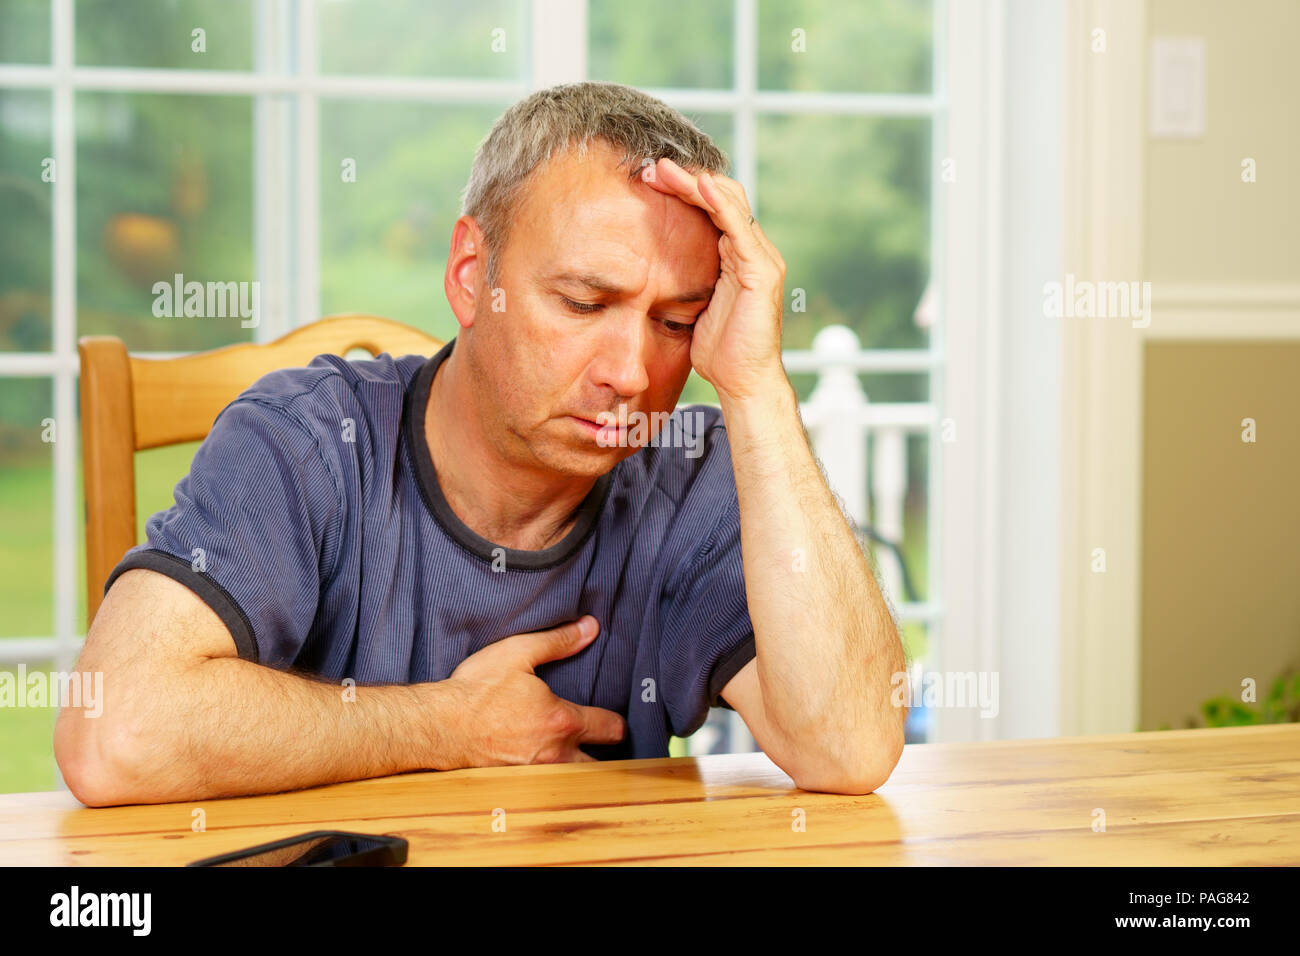 Caucasian man, alone, sit at a table, day, worrying about his situation. Questionning himself. Stock Photo